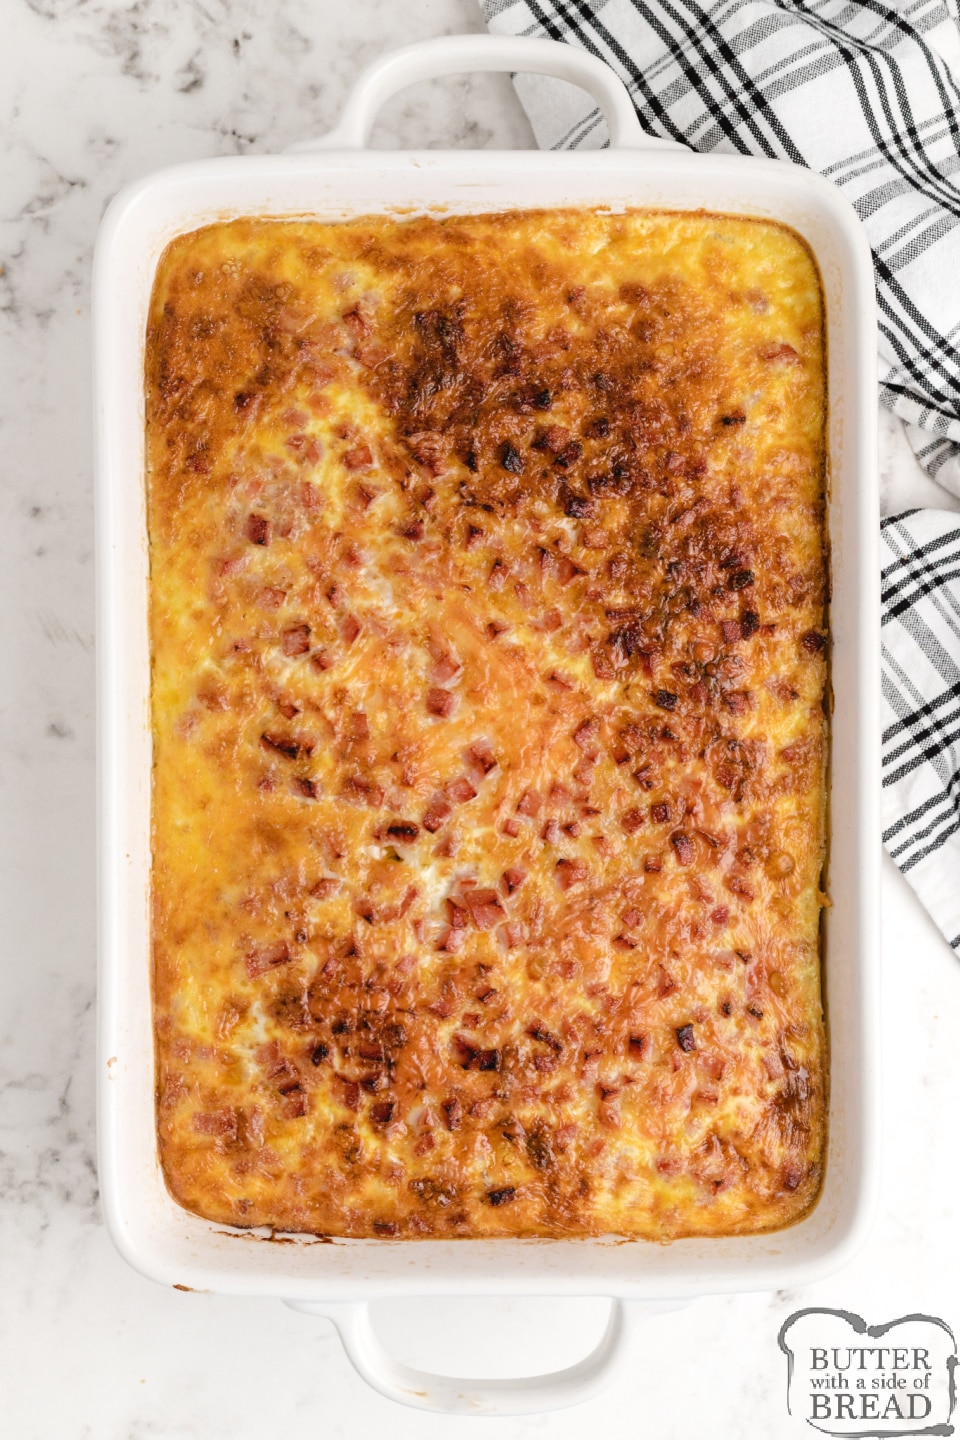 Hash Brown Breakfast Casserole made with a hash brown patty crust, ham, swiss cheese, cheddar cheese and eggs and milk. Only a few minutes of preparation for this easy breakfast casserole recipe!